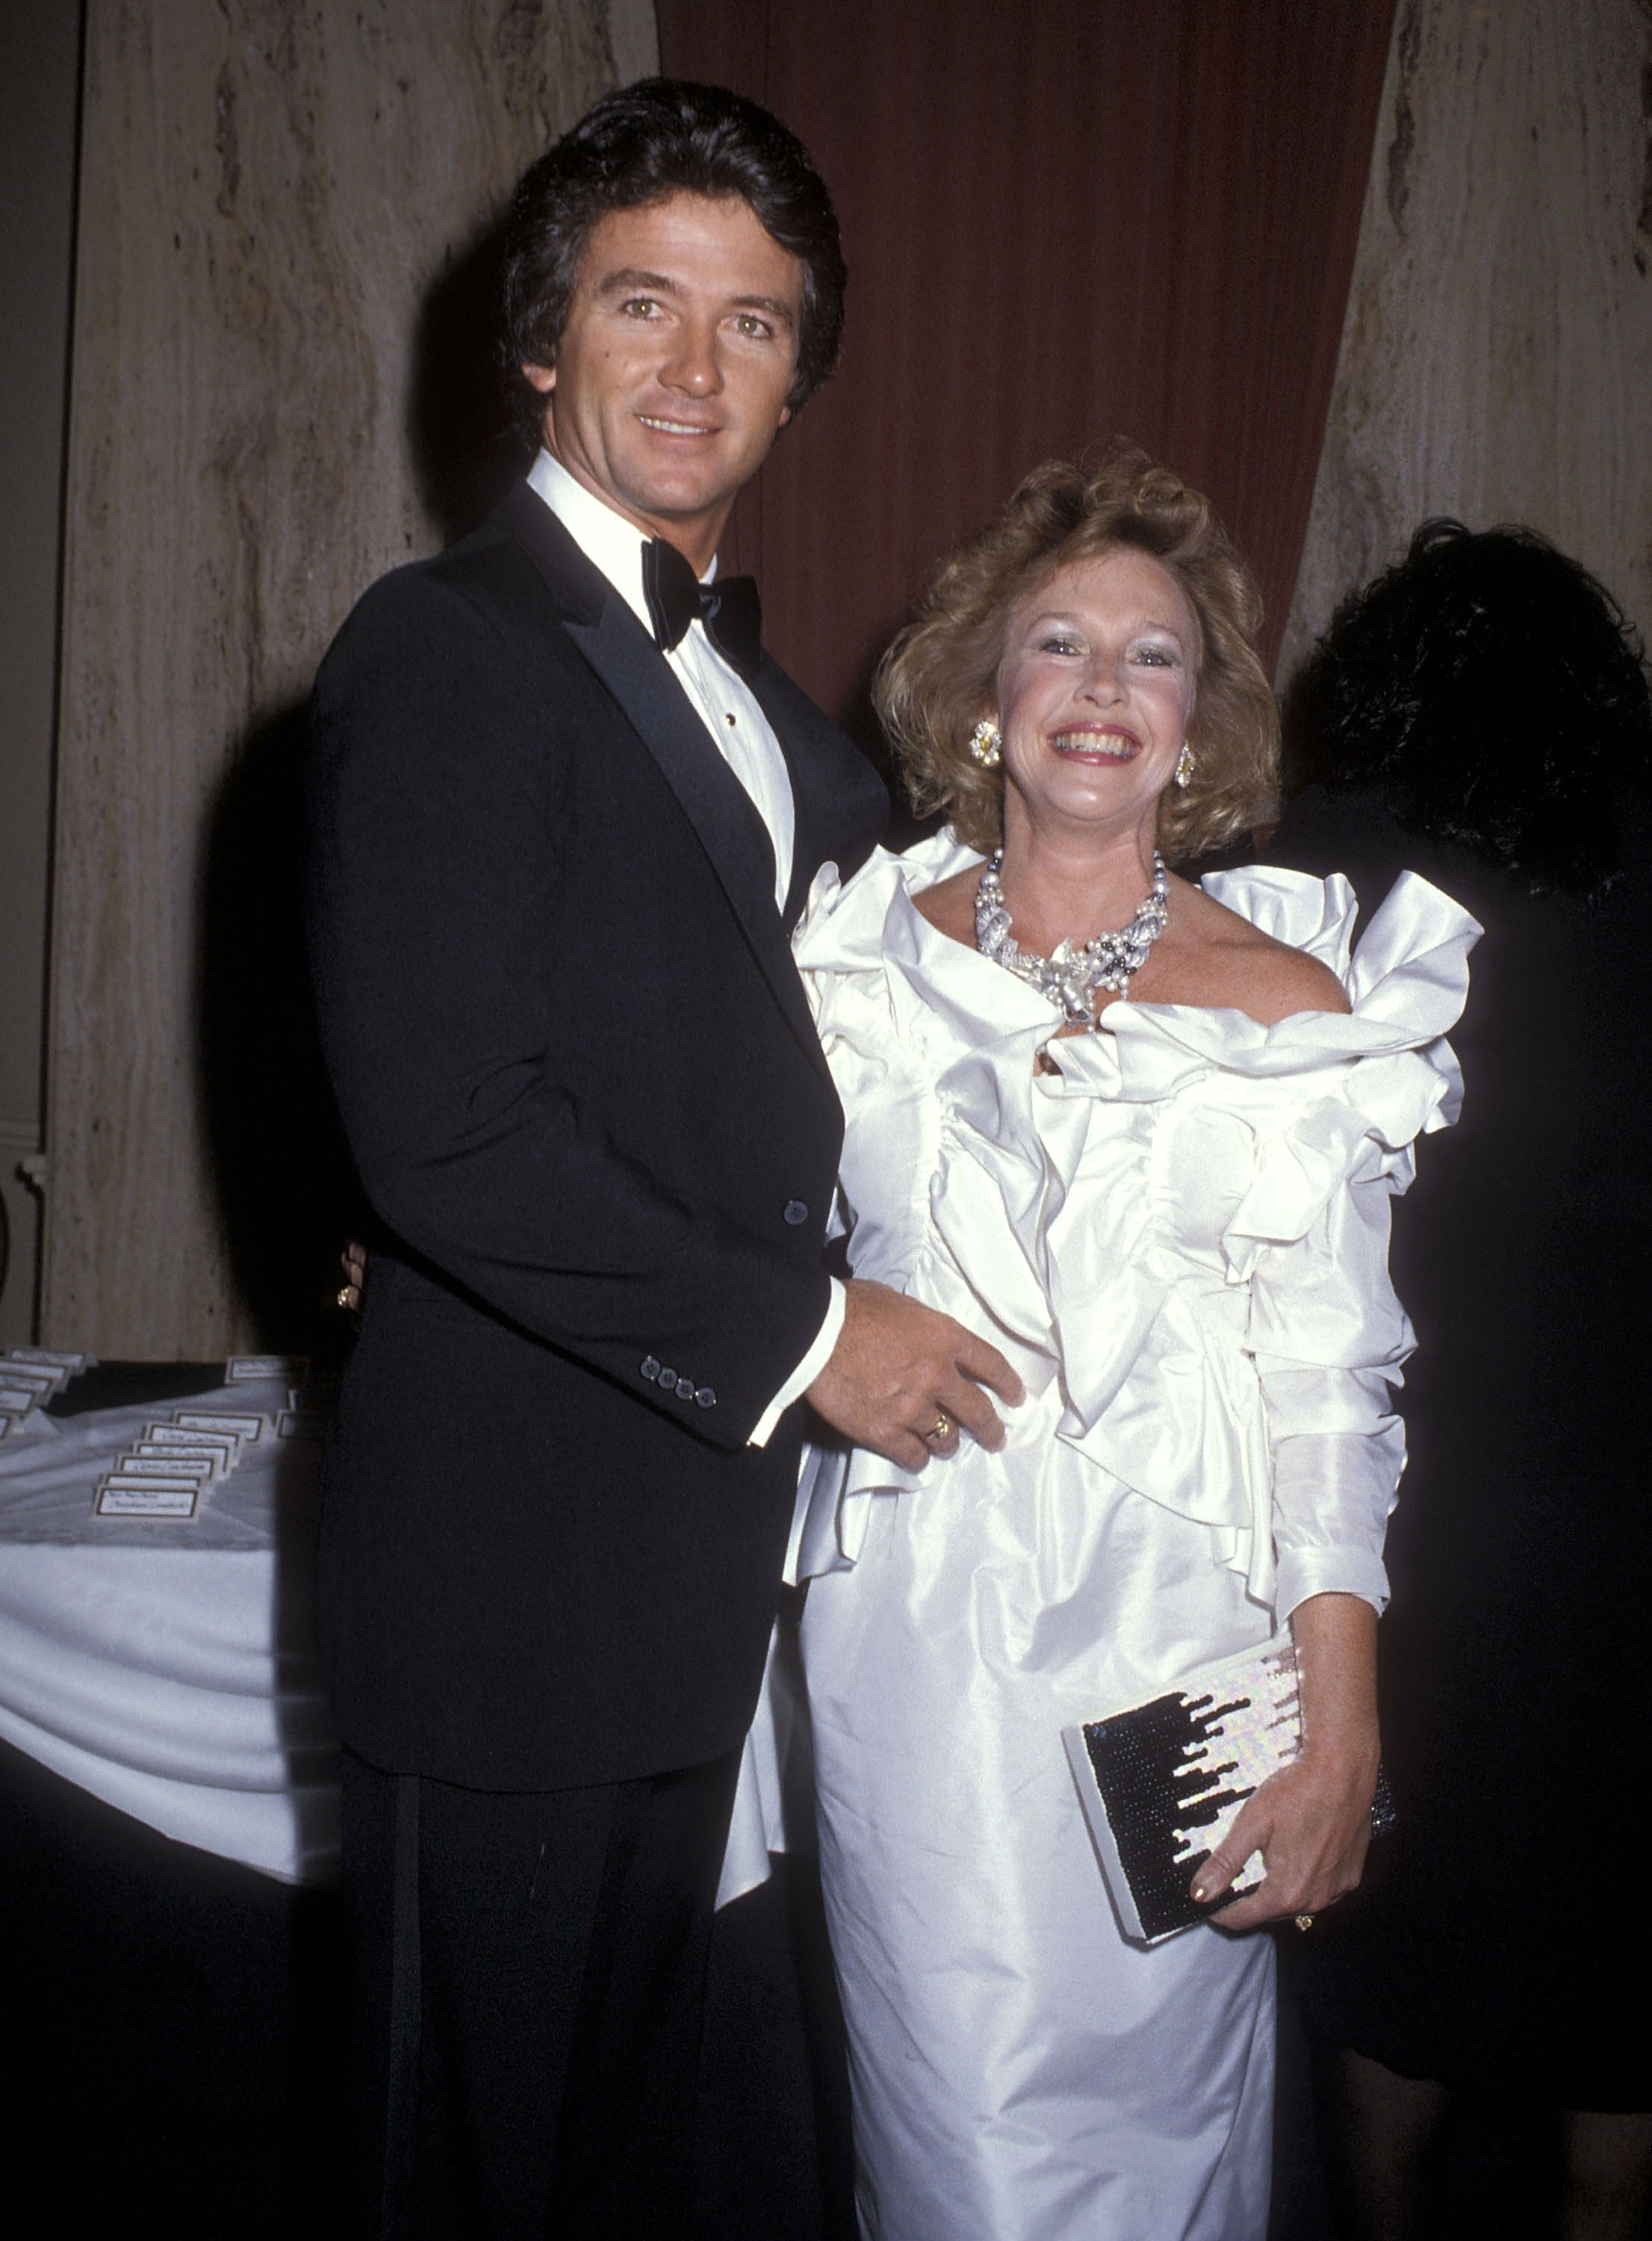 Patrick Duffy and Carlyn Rosser at a party hosted by Aaron Spelling and Douglas S. Cramer to Reveal the 1000th guest star of "The Love Boat" on March 31, 1985, in Beverly Hills, California | Source: Getty Images